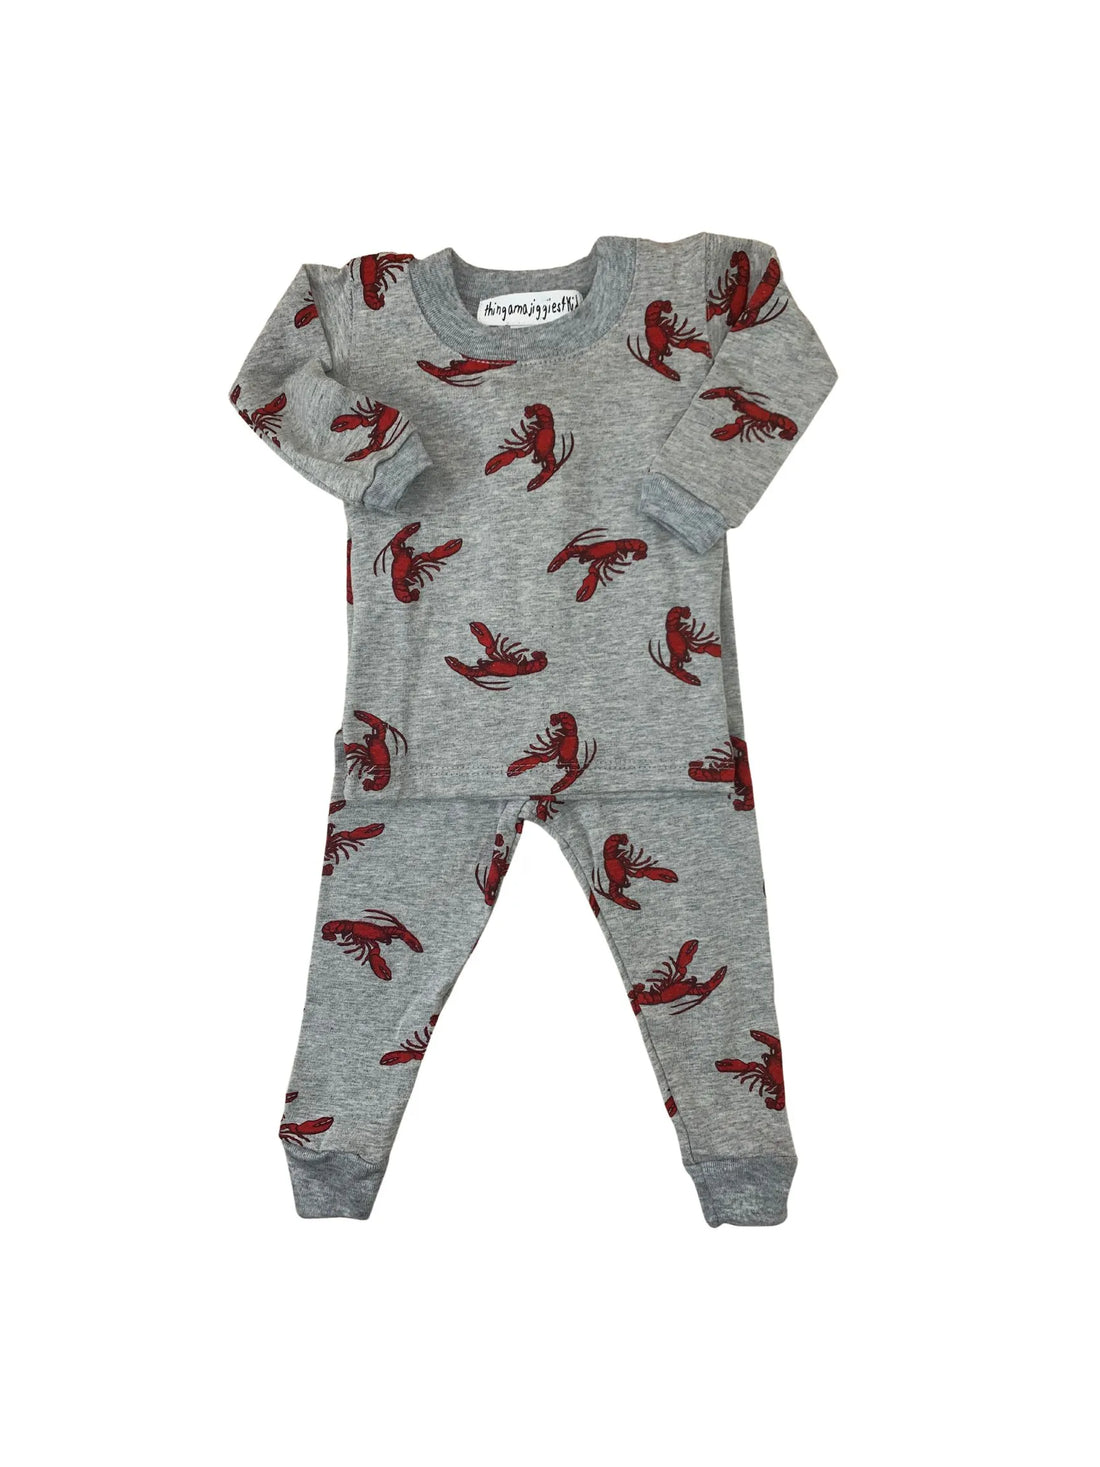 gray 2 piece pajamas with red lobsters all over